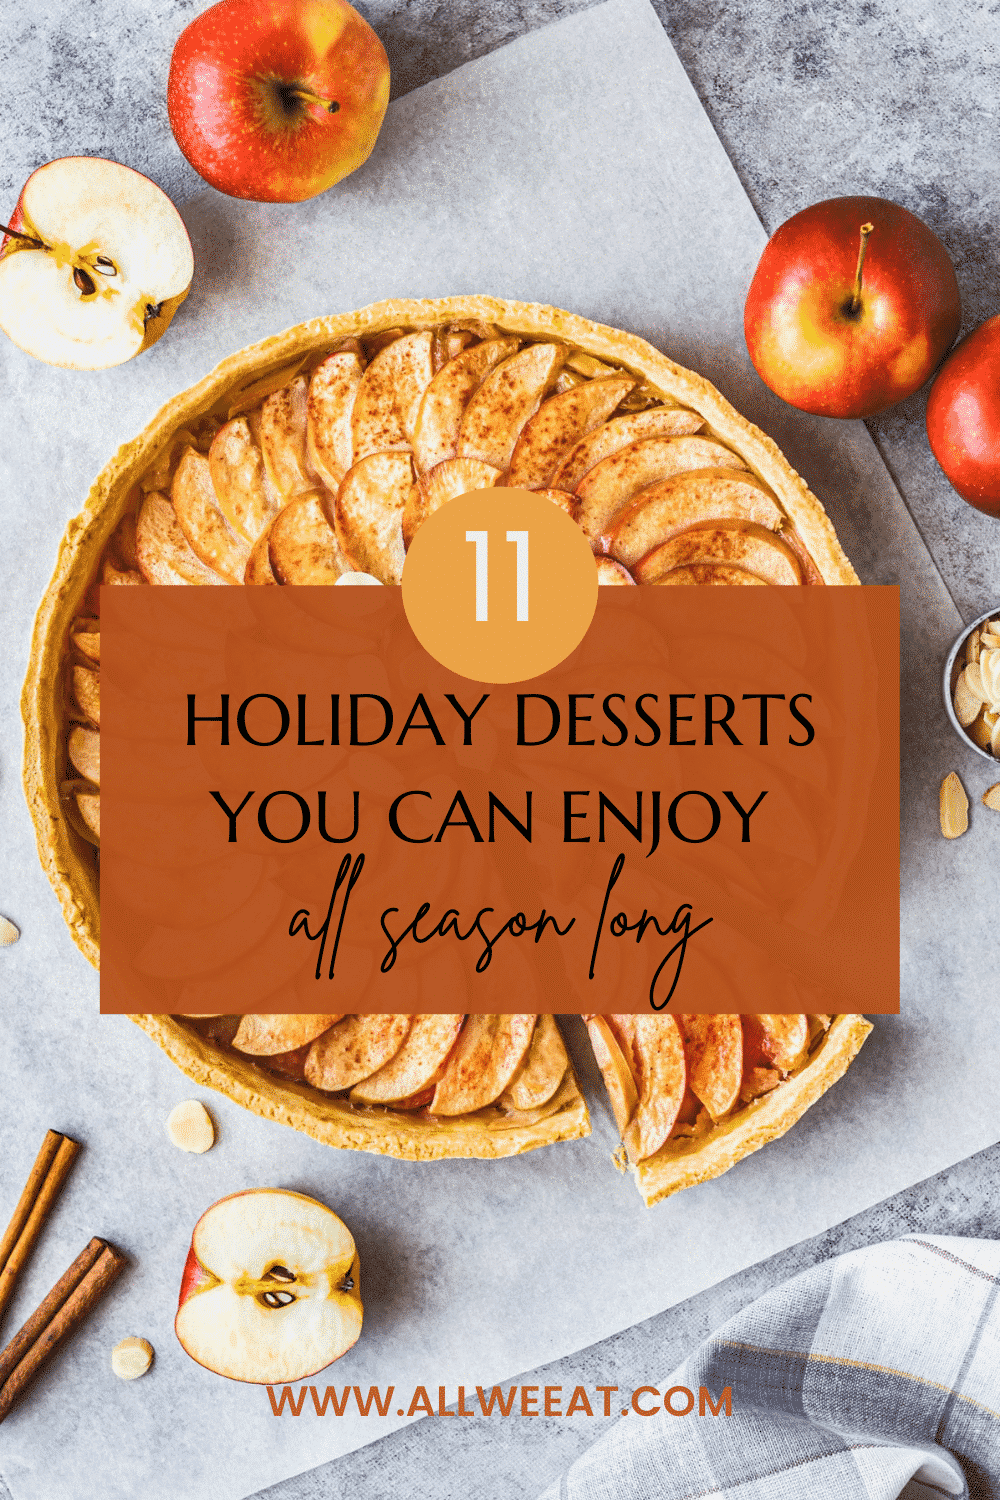 title-photo-11-holiday-desserts-you-can-enjoy-all-season-long-with-apple-tart-photo-in-background